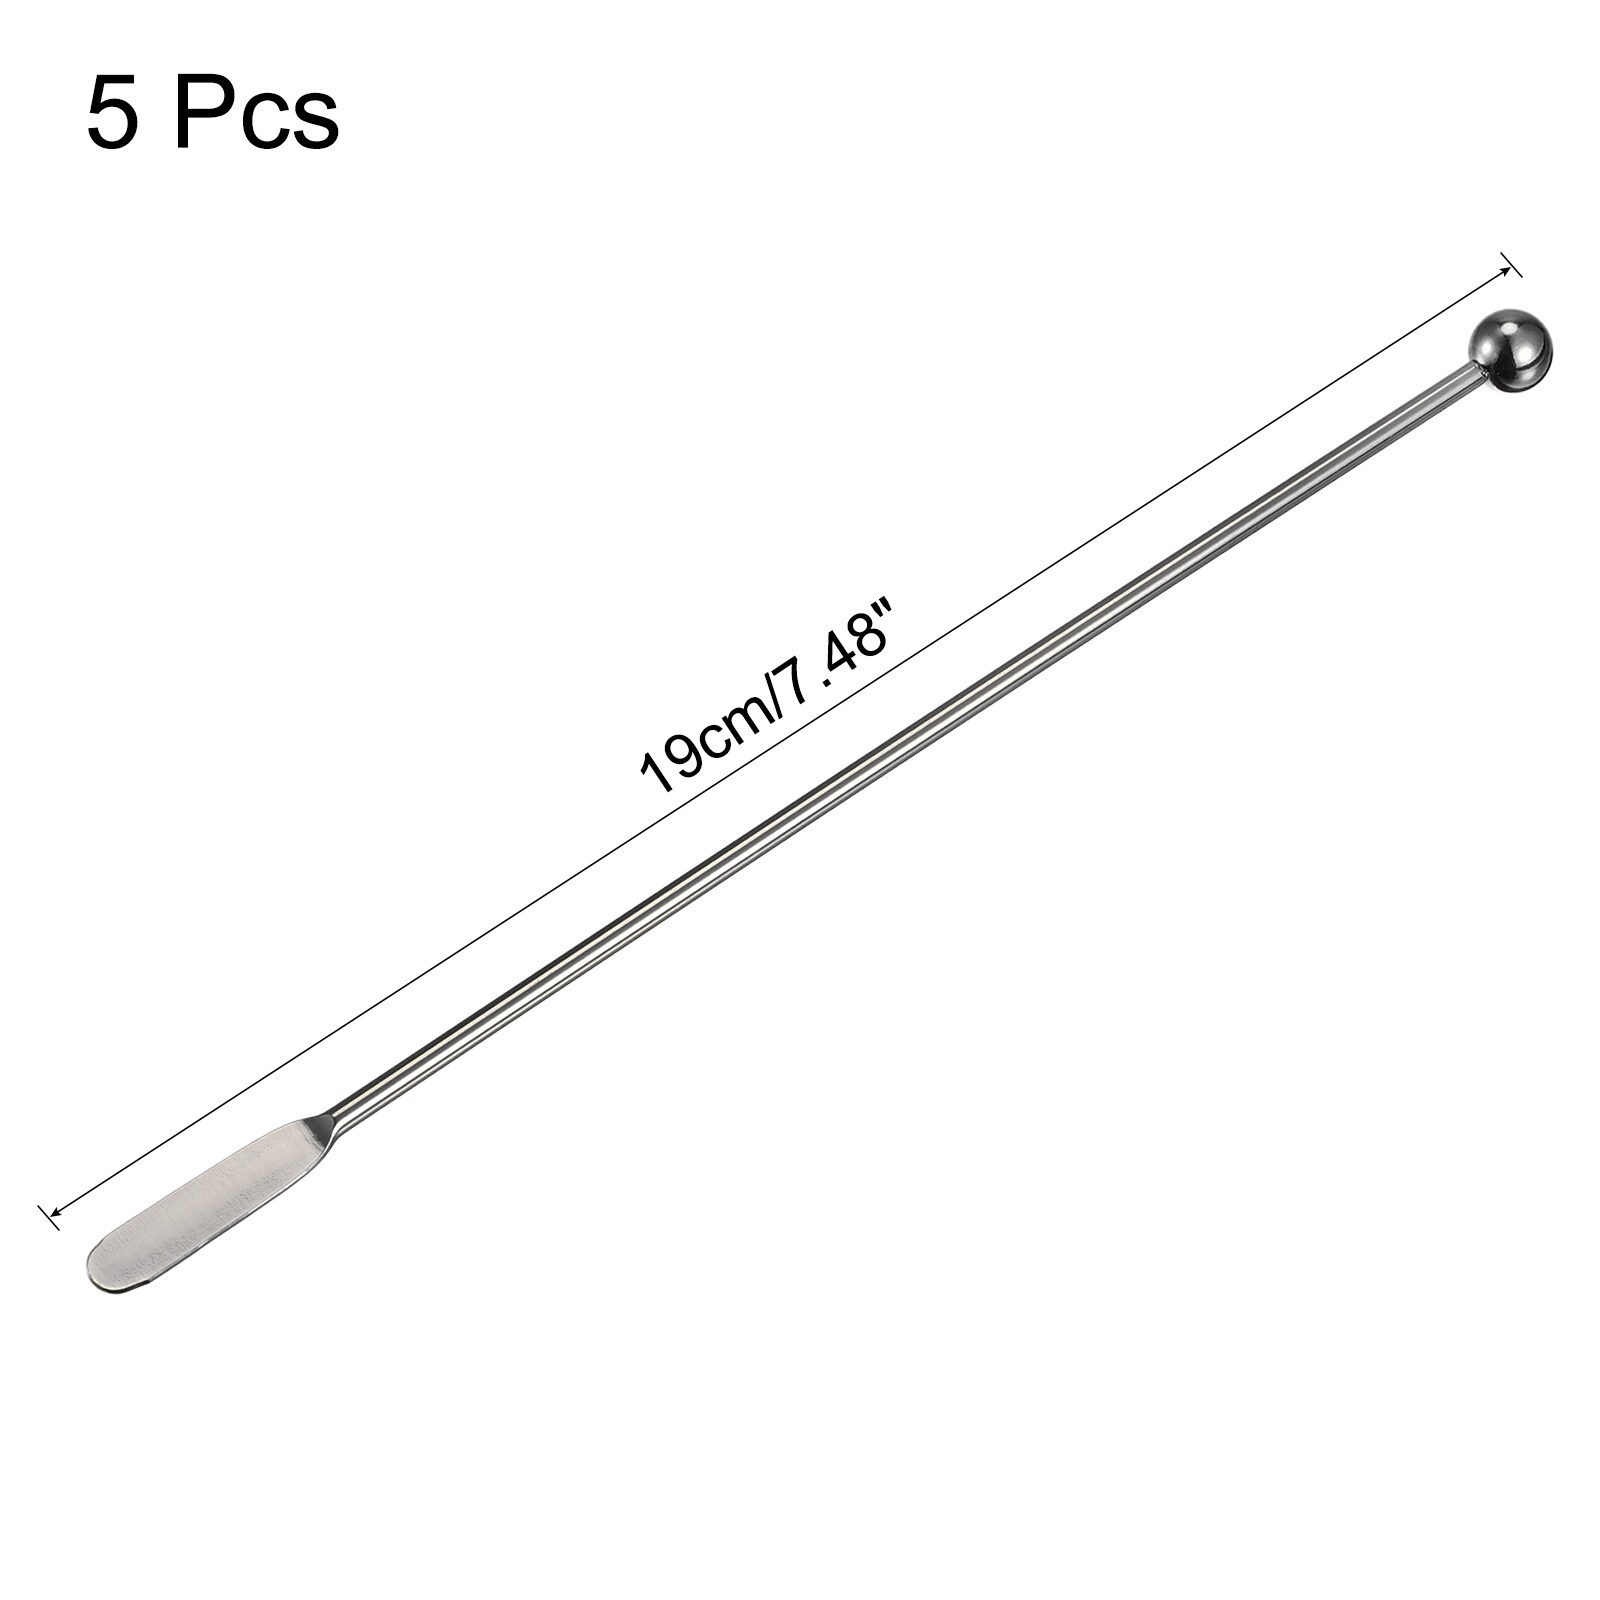 https://ak1.ostkcdn.com/images/products/is/images/direct/b207d3bd13722613921af0a8e8742881a8a7bc12/5pcs-Stainless-Steel-Coffee-Beverage-Stirrer-Cocktail-Drink-Stir-Stick%2C-Silver.jpg